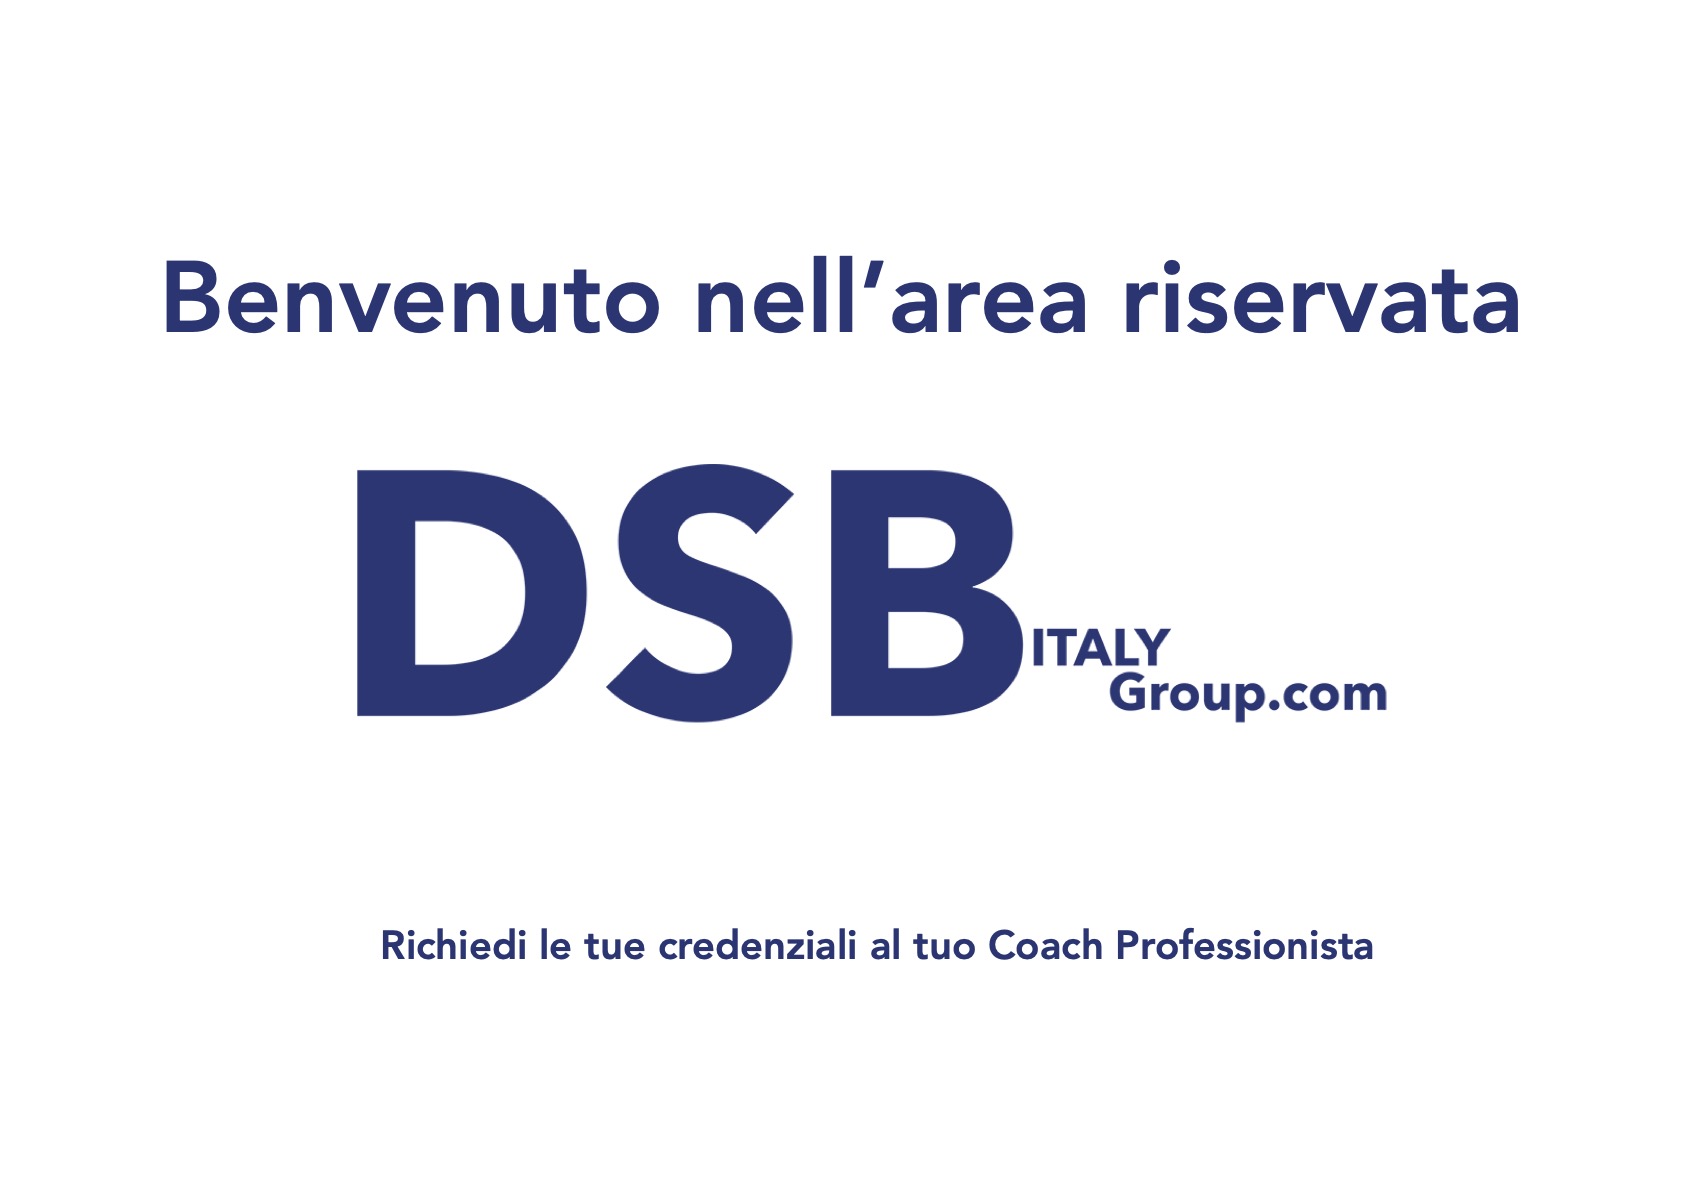 AREA RISERVATA DSB ITALY Group